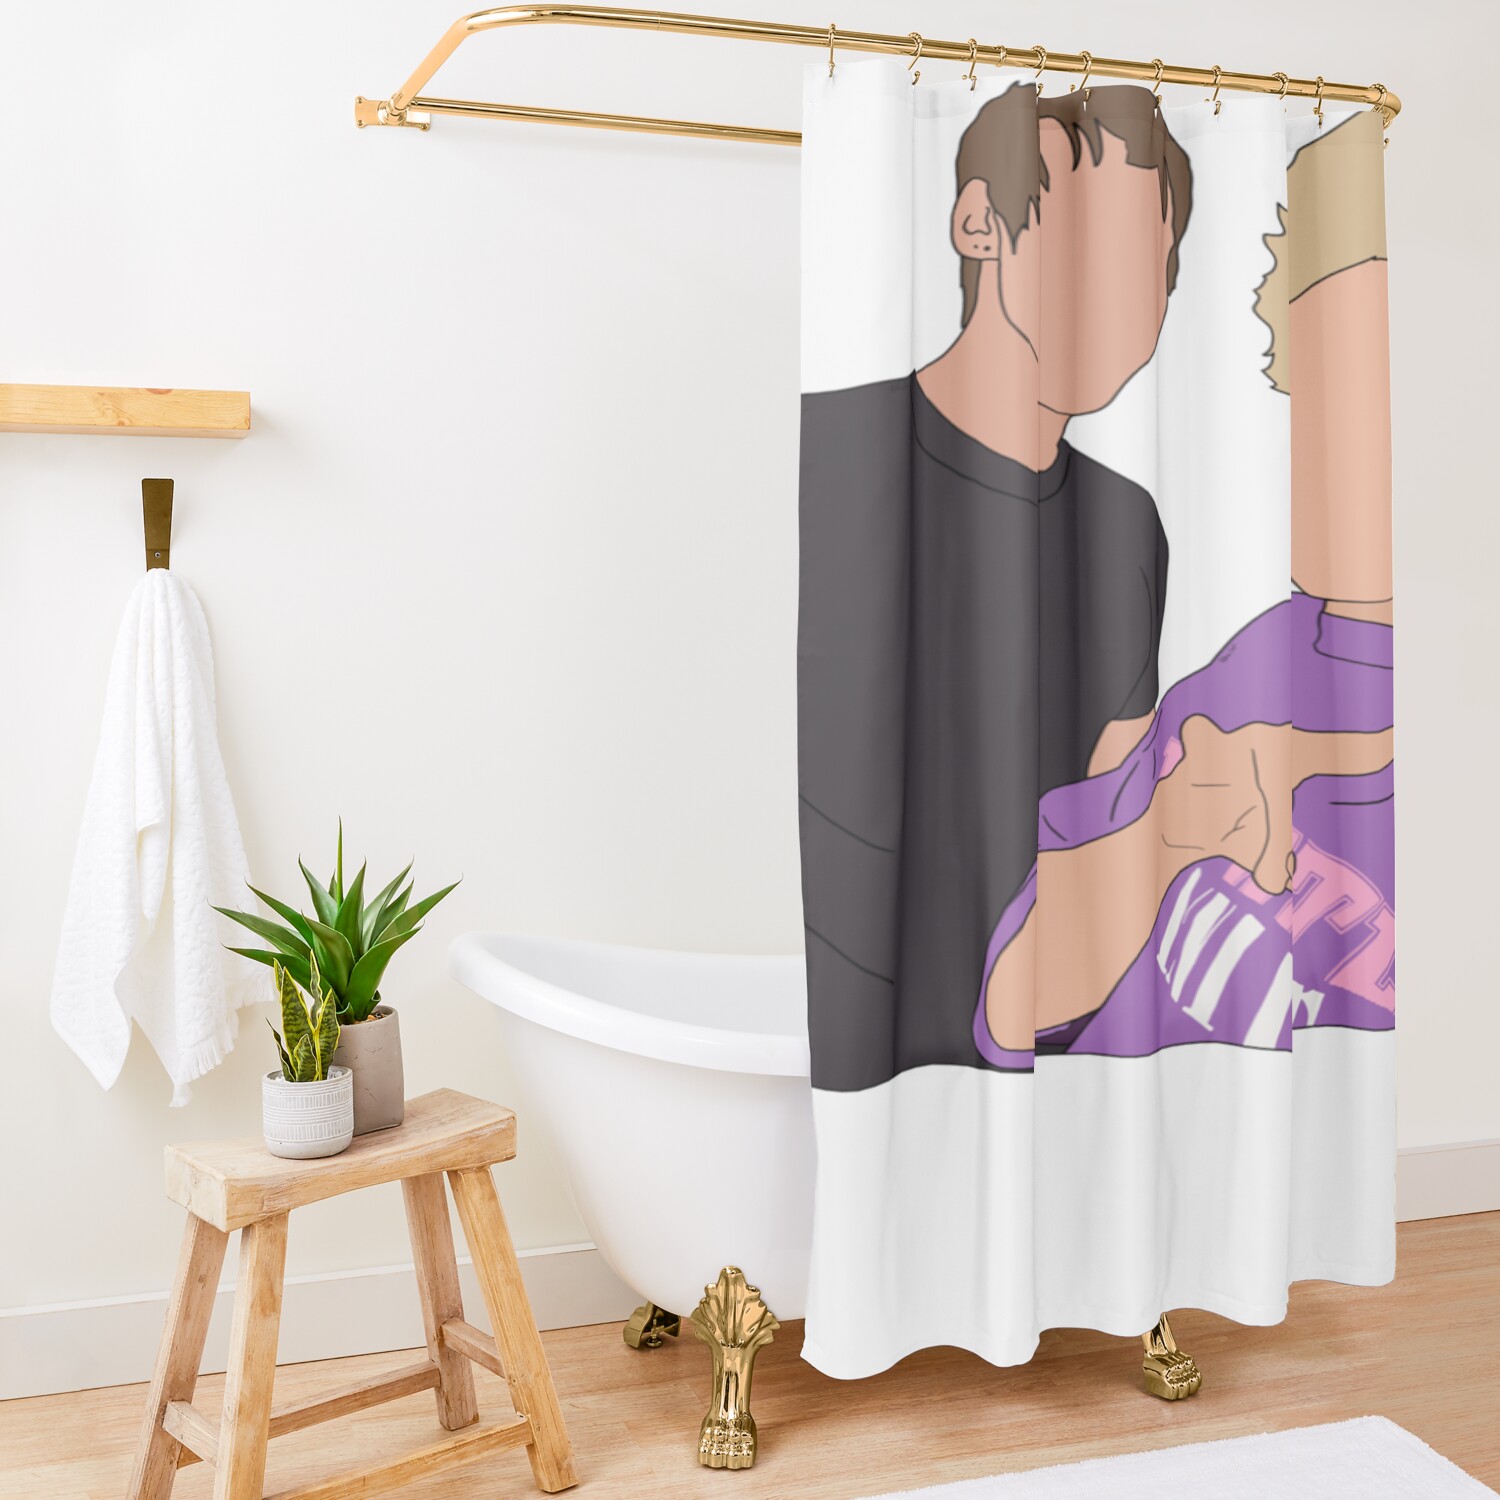 urshower curtain opensquare1500x1500 5 - Sam And Colby Shop